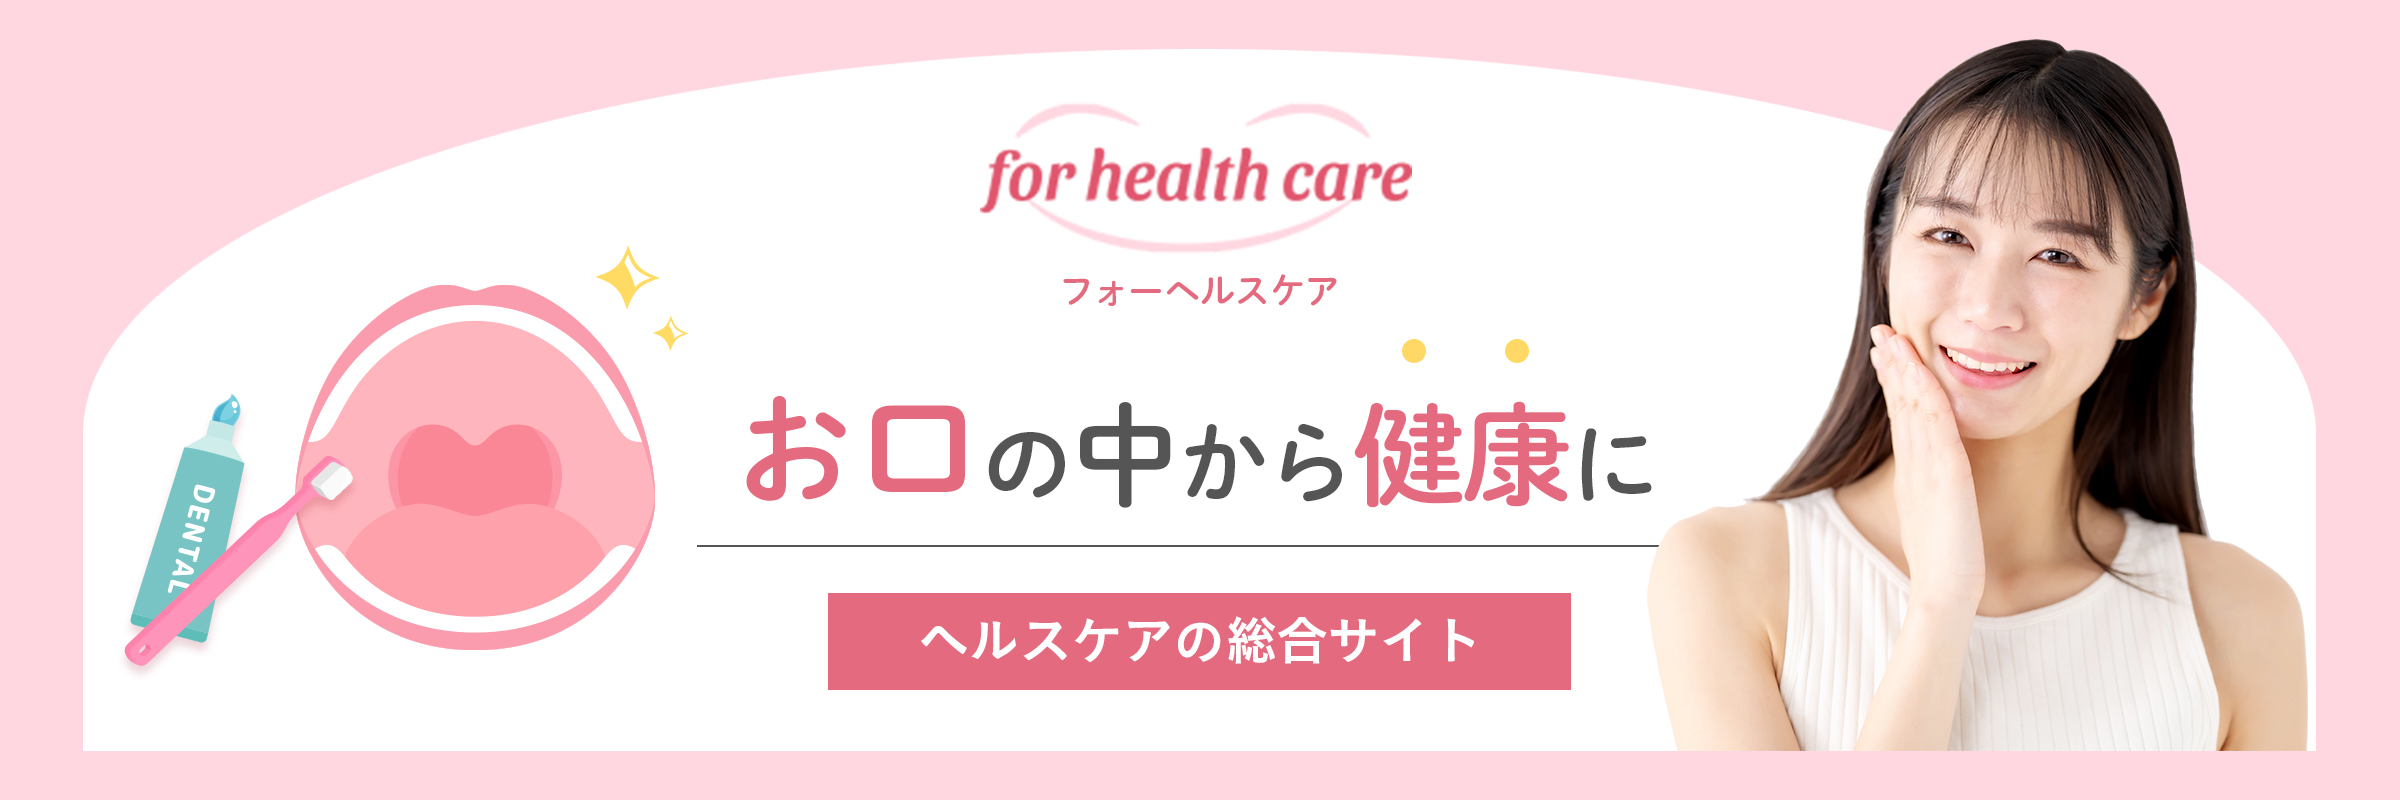 for health care（フォーヘルスケア）